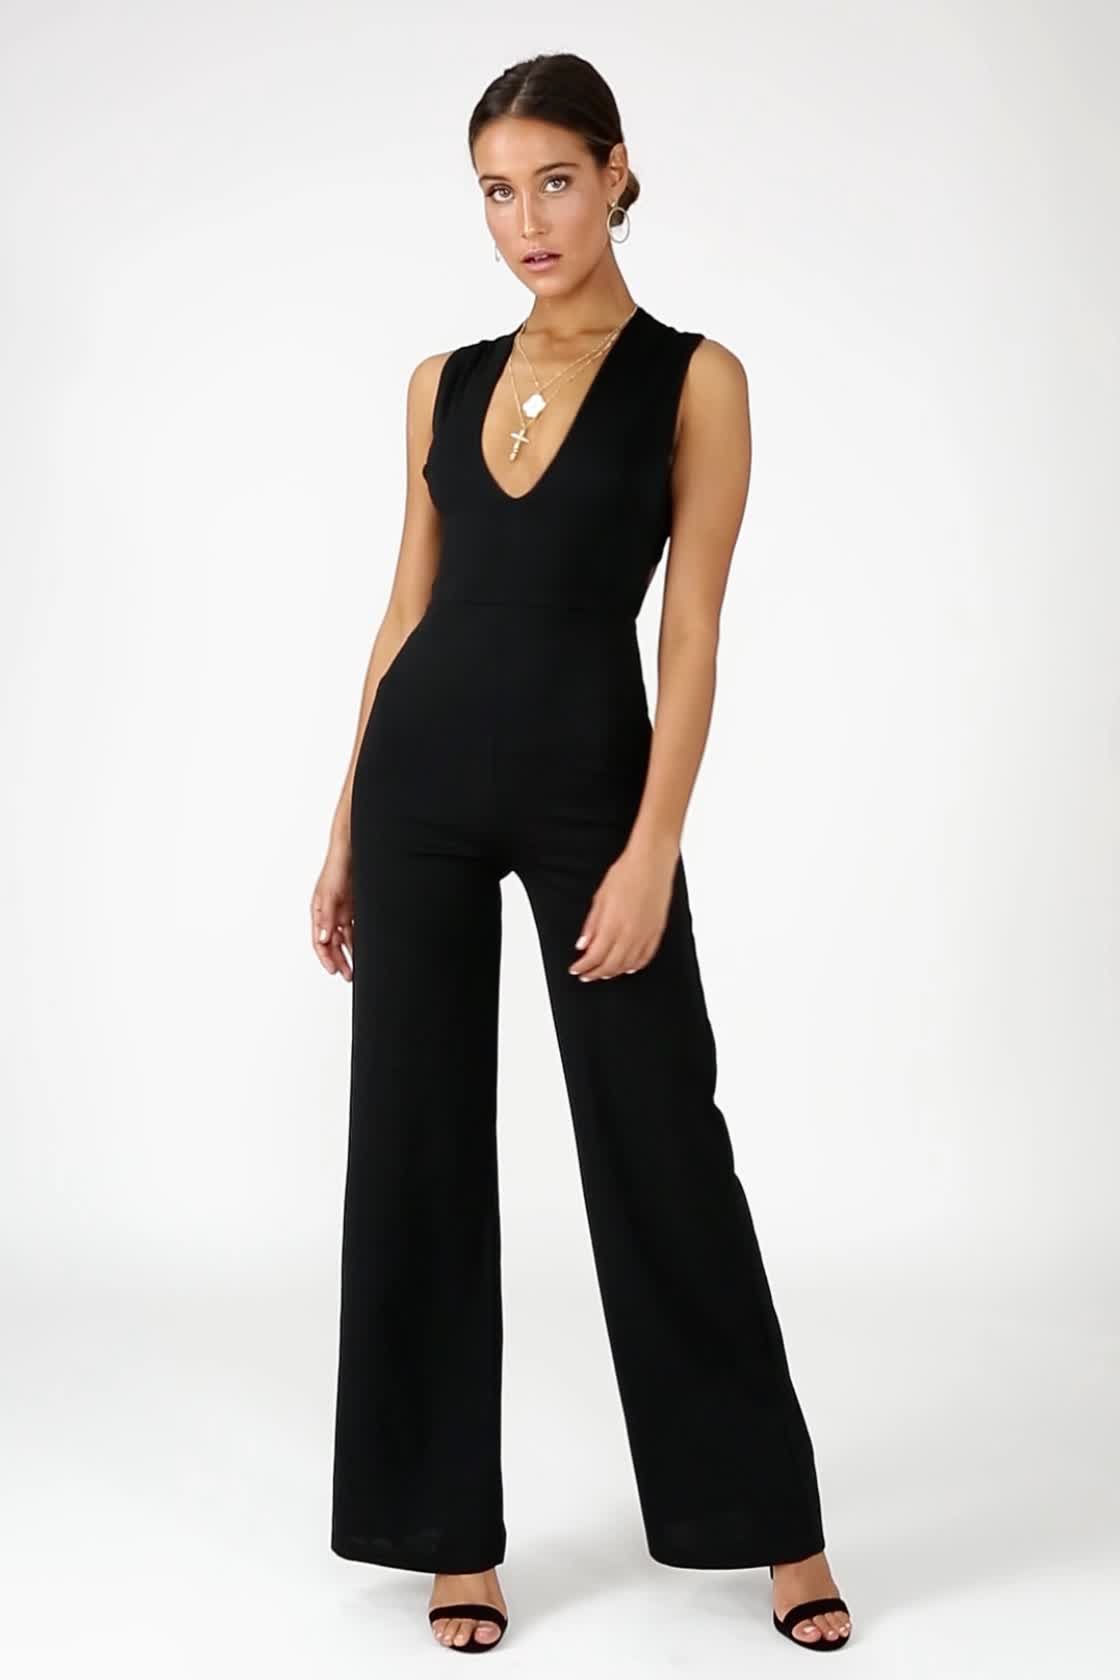 Thinking Out Loud Black Backless Jumpsuit | Lulus (US)